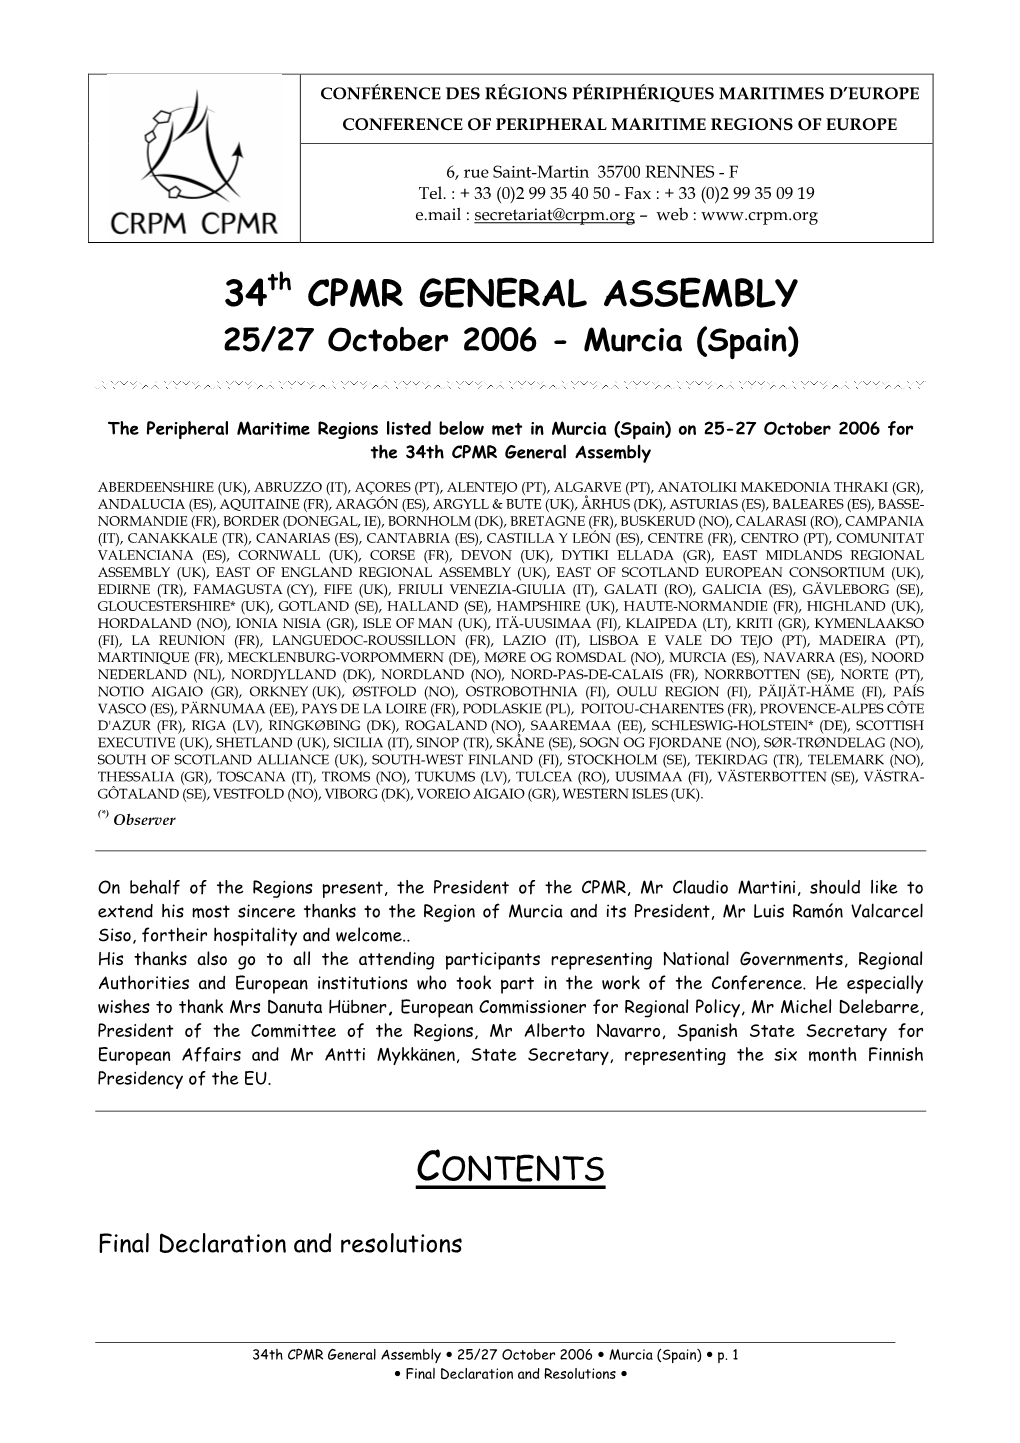 34 Cpmr General Assembly